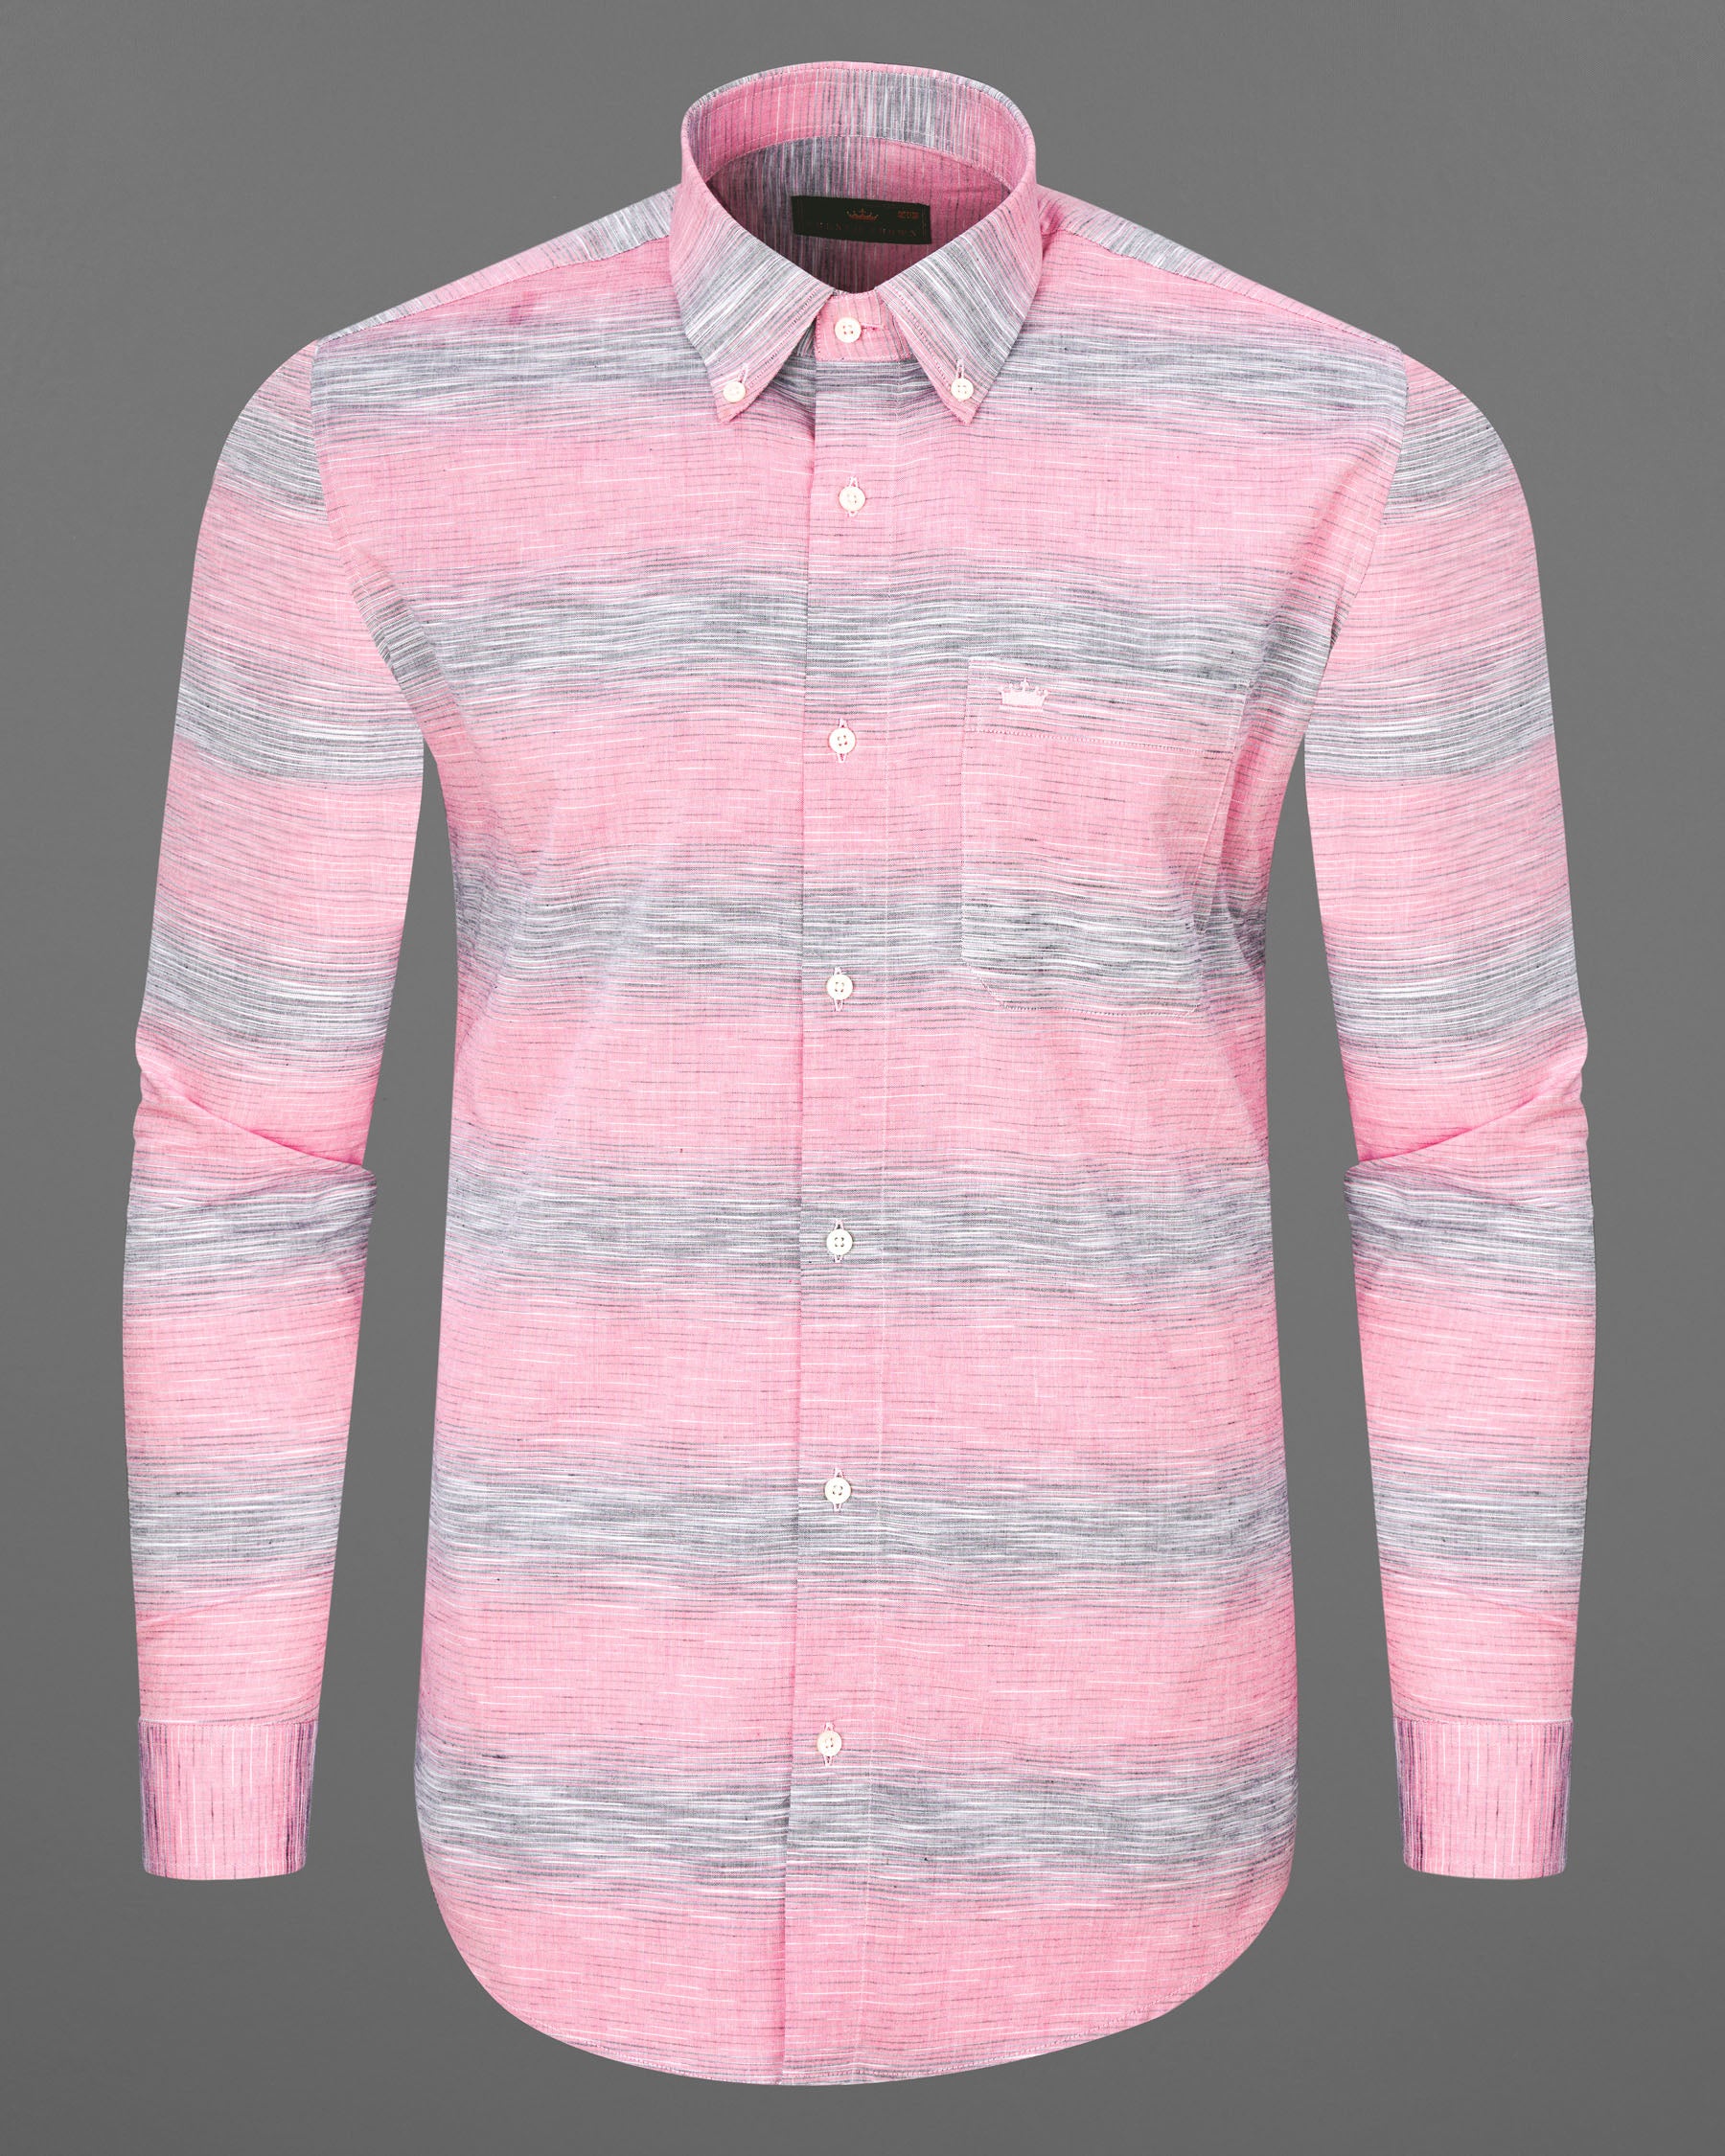 Pale Chestnut Pink And Hurricane Gray Striped Royal Oxford Shirt 7485-BD-38, 7485-BD-H-38, 7485-BD-39, 7485-BD-H-39, 7485-BD-40, 7485-BD-H-40, 7485-BD-42, 7485-BD-H-42, 7485-BD-44, 7485-BD-H-44, 7485-BD-46, 7485-BD-H-46, 7485-BD-48, 7485-BD-H-48, 7485-BD-50, 7485-BD-H-50, 7485-BD-52, 7485-BD-H-52